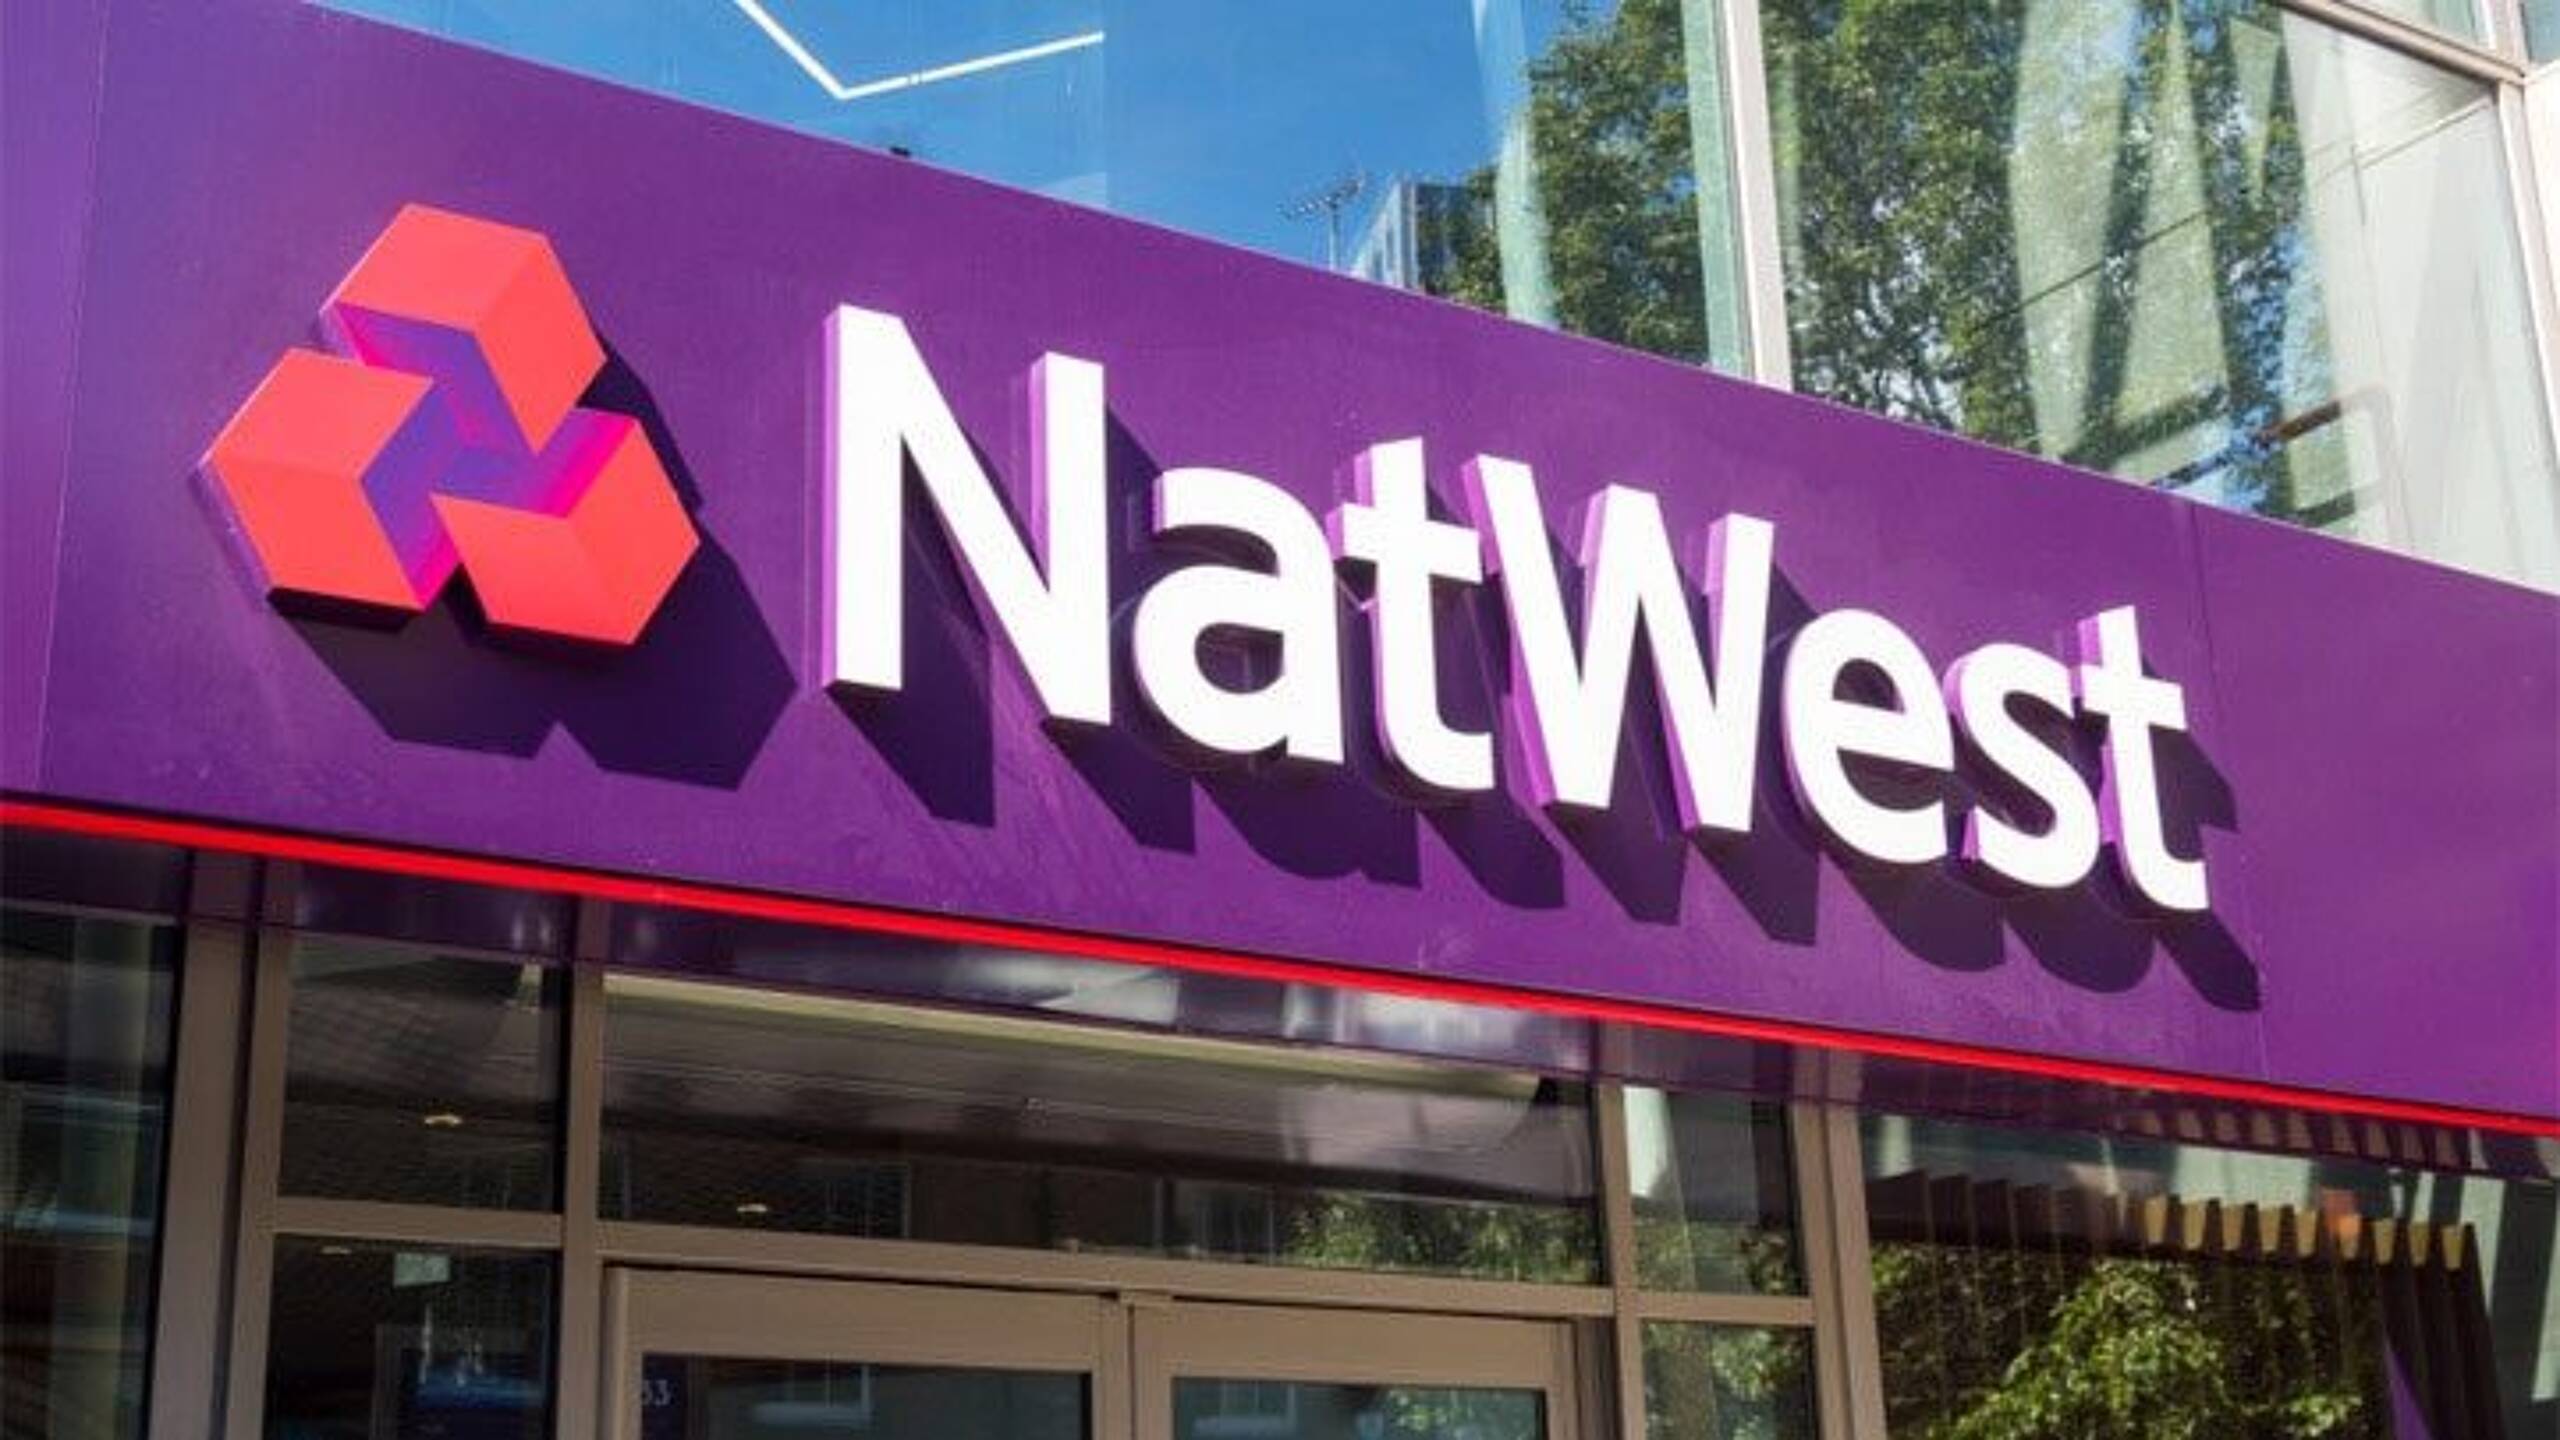 NatWest pledges £1bn to support low-carbon manufacturing